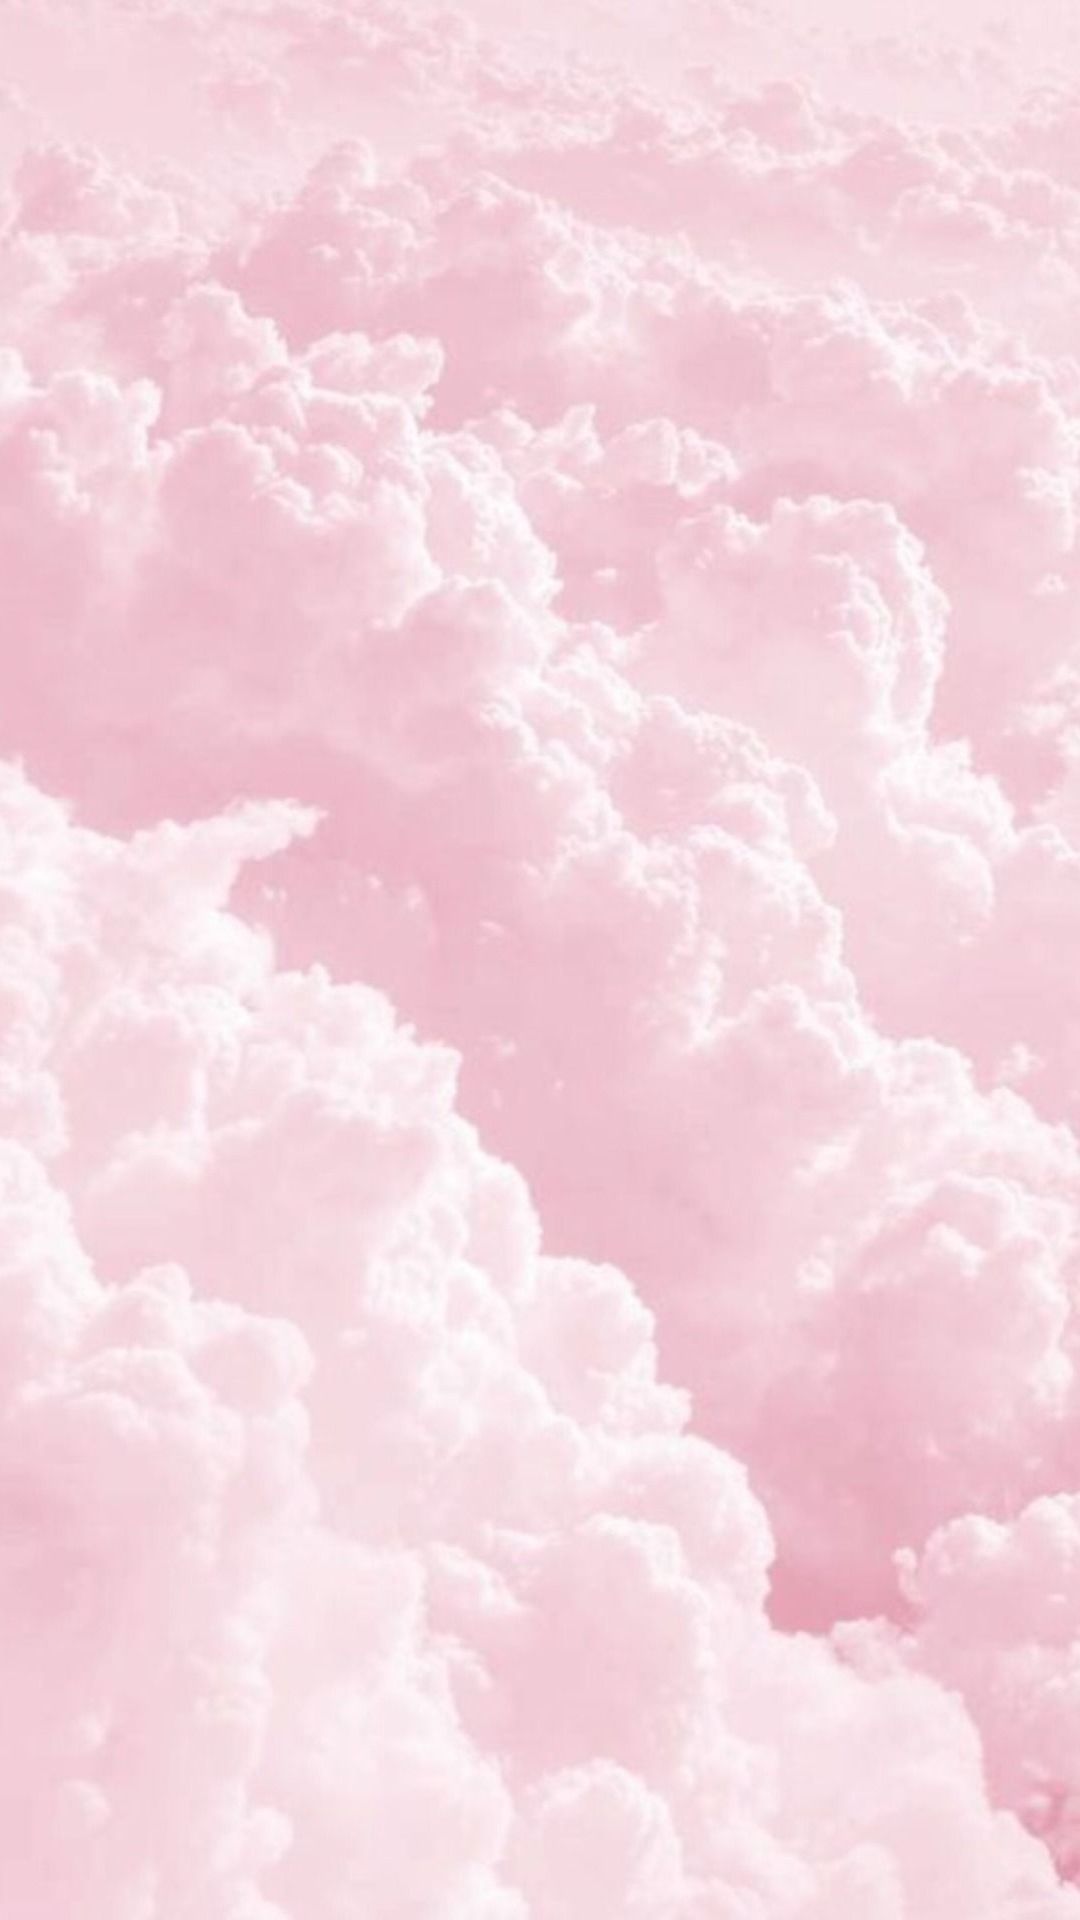 Aesthetic Pink Wallpapers - Top 35 Best Aesthetic Pink Backgrounds Download